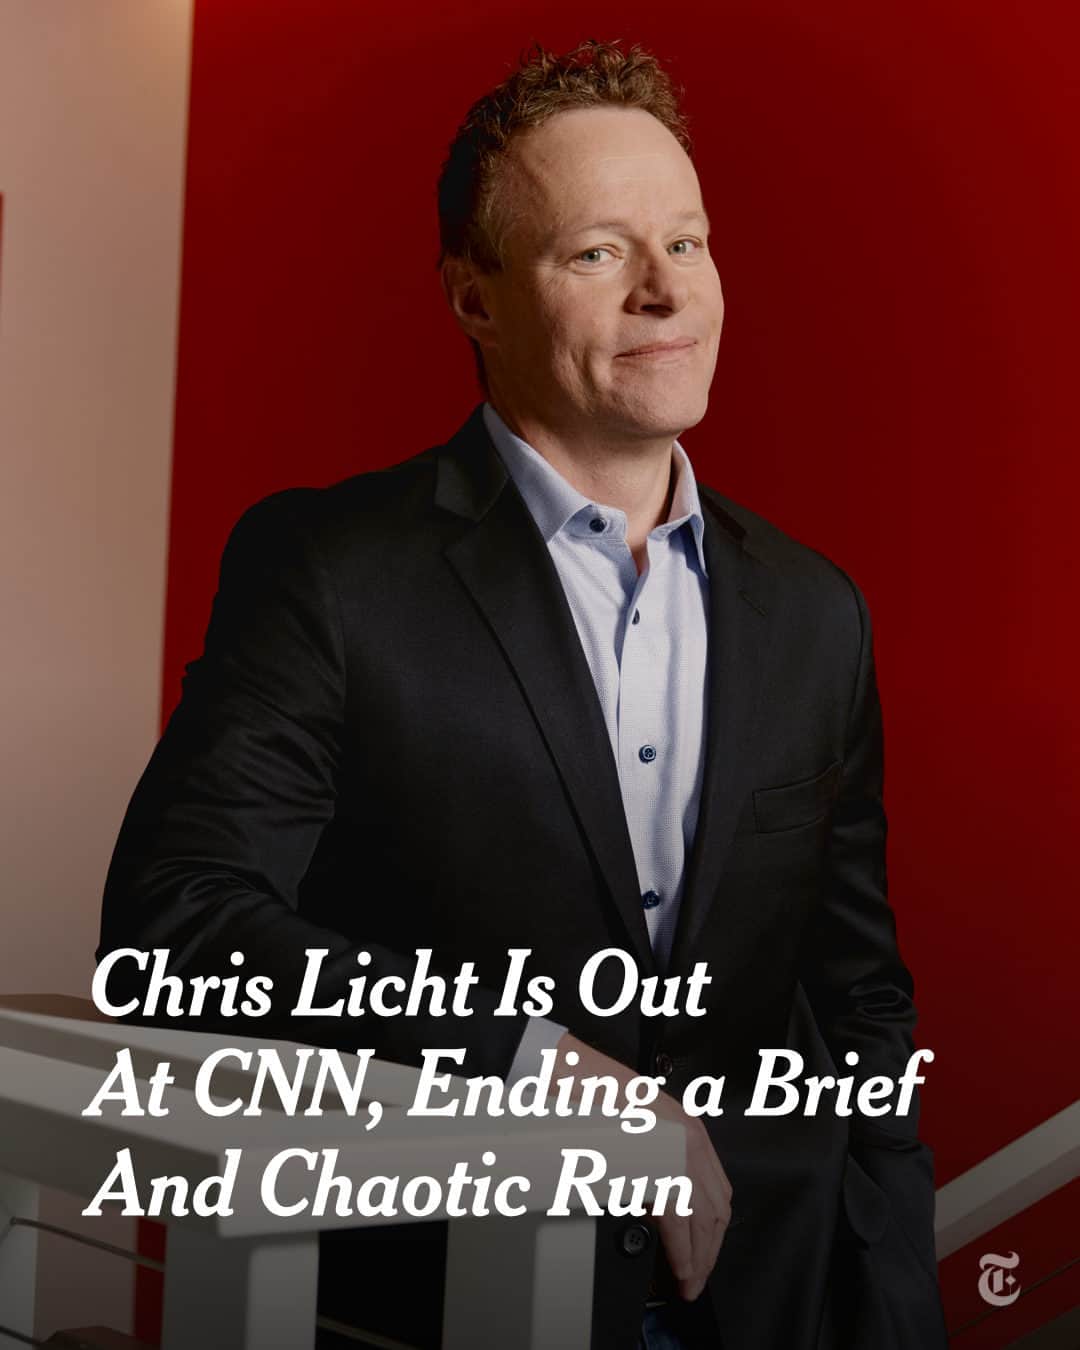 ニューヨーク・タイムズさんのインスタグラム写真 - (ニューヨーク・タイムズInstagram)「Chris Licht, the former television producer who oversaw a brief and chaotic run as the chairman of CNN, is out at the network, according to a person briefed on the decision.  Licht’s 13-month run at CNN was marked by one controversy after another, culminating in his exit earlier this week. He got off to a bumpy start even before he had officially started when he oversaw the shuttering of the costly CNN+ streaming service at the request of its network’s new owners, who were skeptical about a stand-alone digital product. The cuts resulted in scores of layoffs.  Licht had vowed to bring a middle-of-the-road balance to CNN’s journalism and when he took the job, he told friends it was a “calling.” But the job would prove much more difficult. Ratings plummeted during Licht’s management and a series of programming miscues — including an ill-fated morning show co-anchored by Don Lemon, as well as organizing a town hall featuring former President Donald Trump that was subject to withering criticism — did little to shore up support with his colleagues.  Things deteriorated last week when The Atlantic published a 15,000-word profile extensively documenting Licht’s stormy tenure, including criticism of the network’s pandemic coverage that rankled the network’s rank-and-file.  Read our full story about what led to Licht’s departure at the link in our bio. Photo by @vincenttullo」6月7日 22時36分 - nytimes